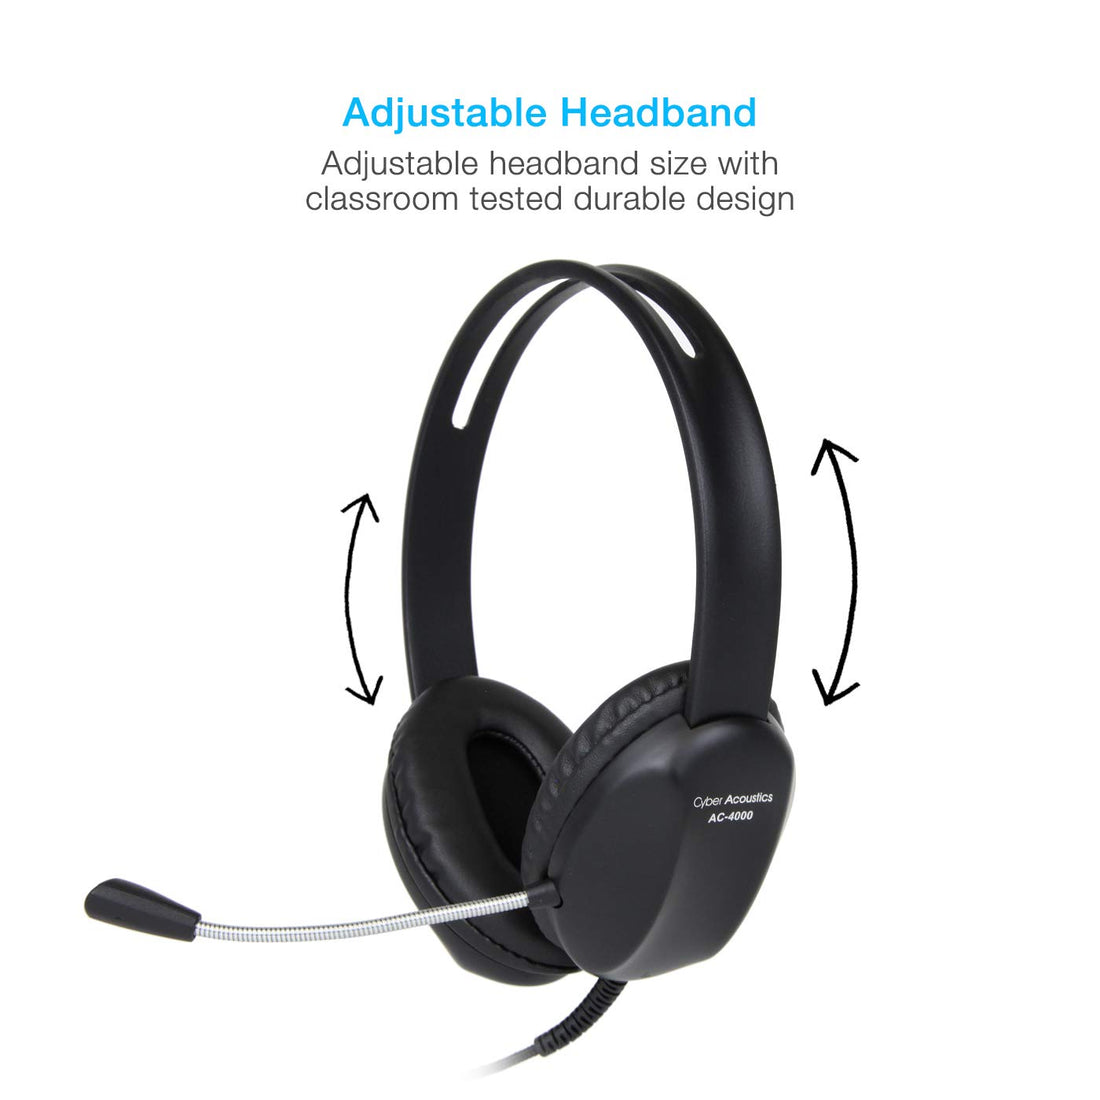 Cyber Acoustics 3.5mm Stereo Headset with Headphones and Noise Cancelling Microphone for Pcs, Tablets, and Cell Phones in The Office, Classroom or Home (AC-4000)